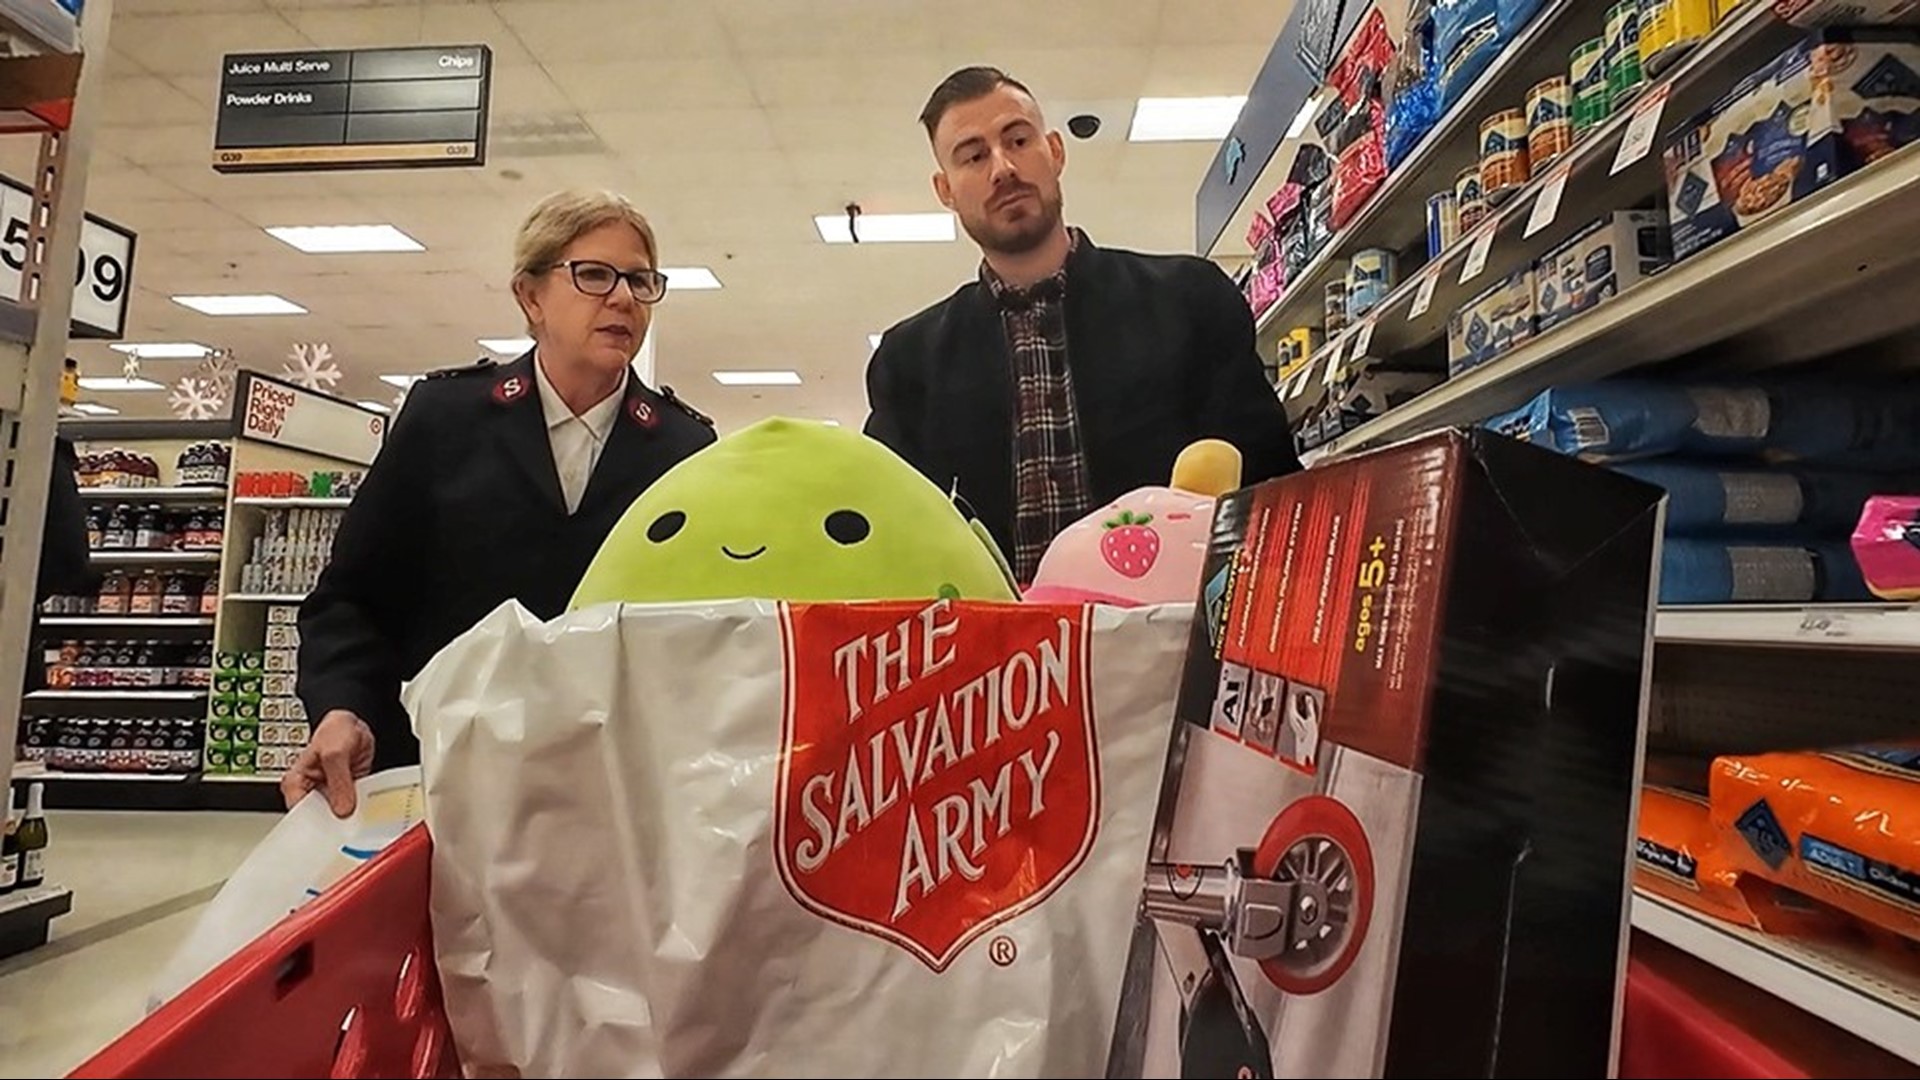 The Salvation Army has been in Washington for more than 130 years. Sponsored by The Salvation Army.